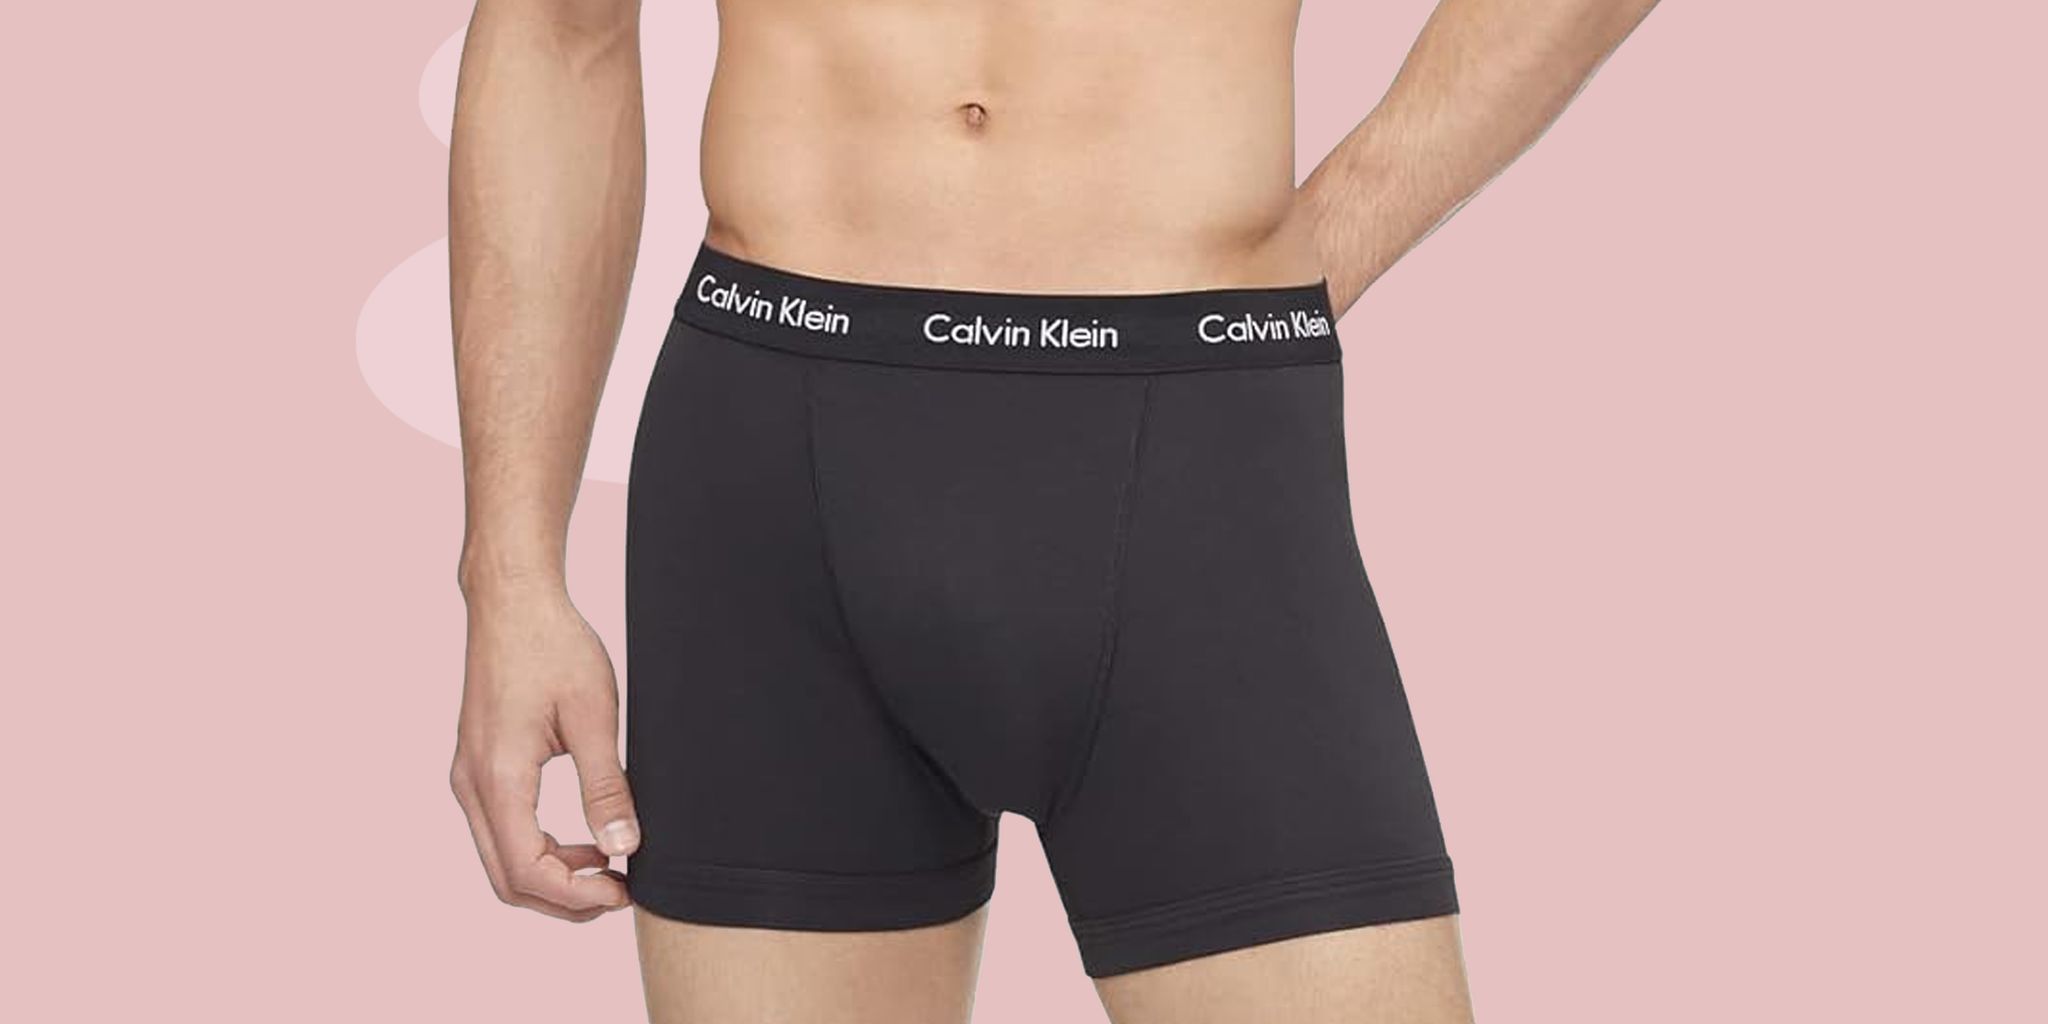 Calvin Klein's Cyber Monday 2023 Sale is Here—Take 50% Off